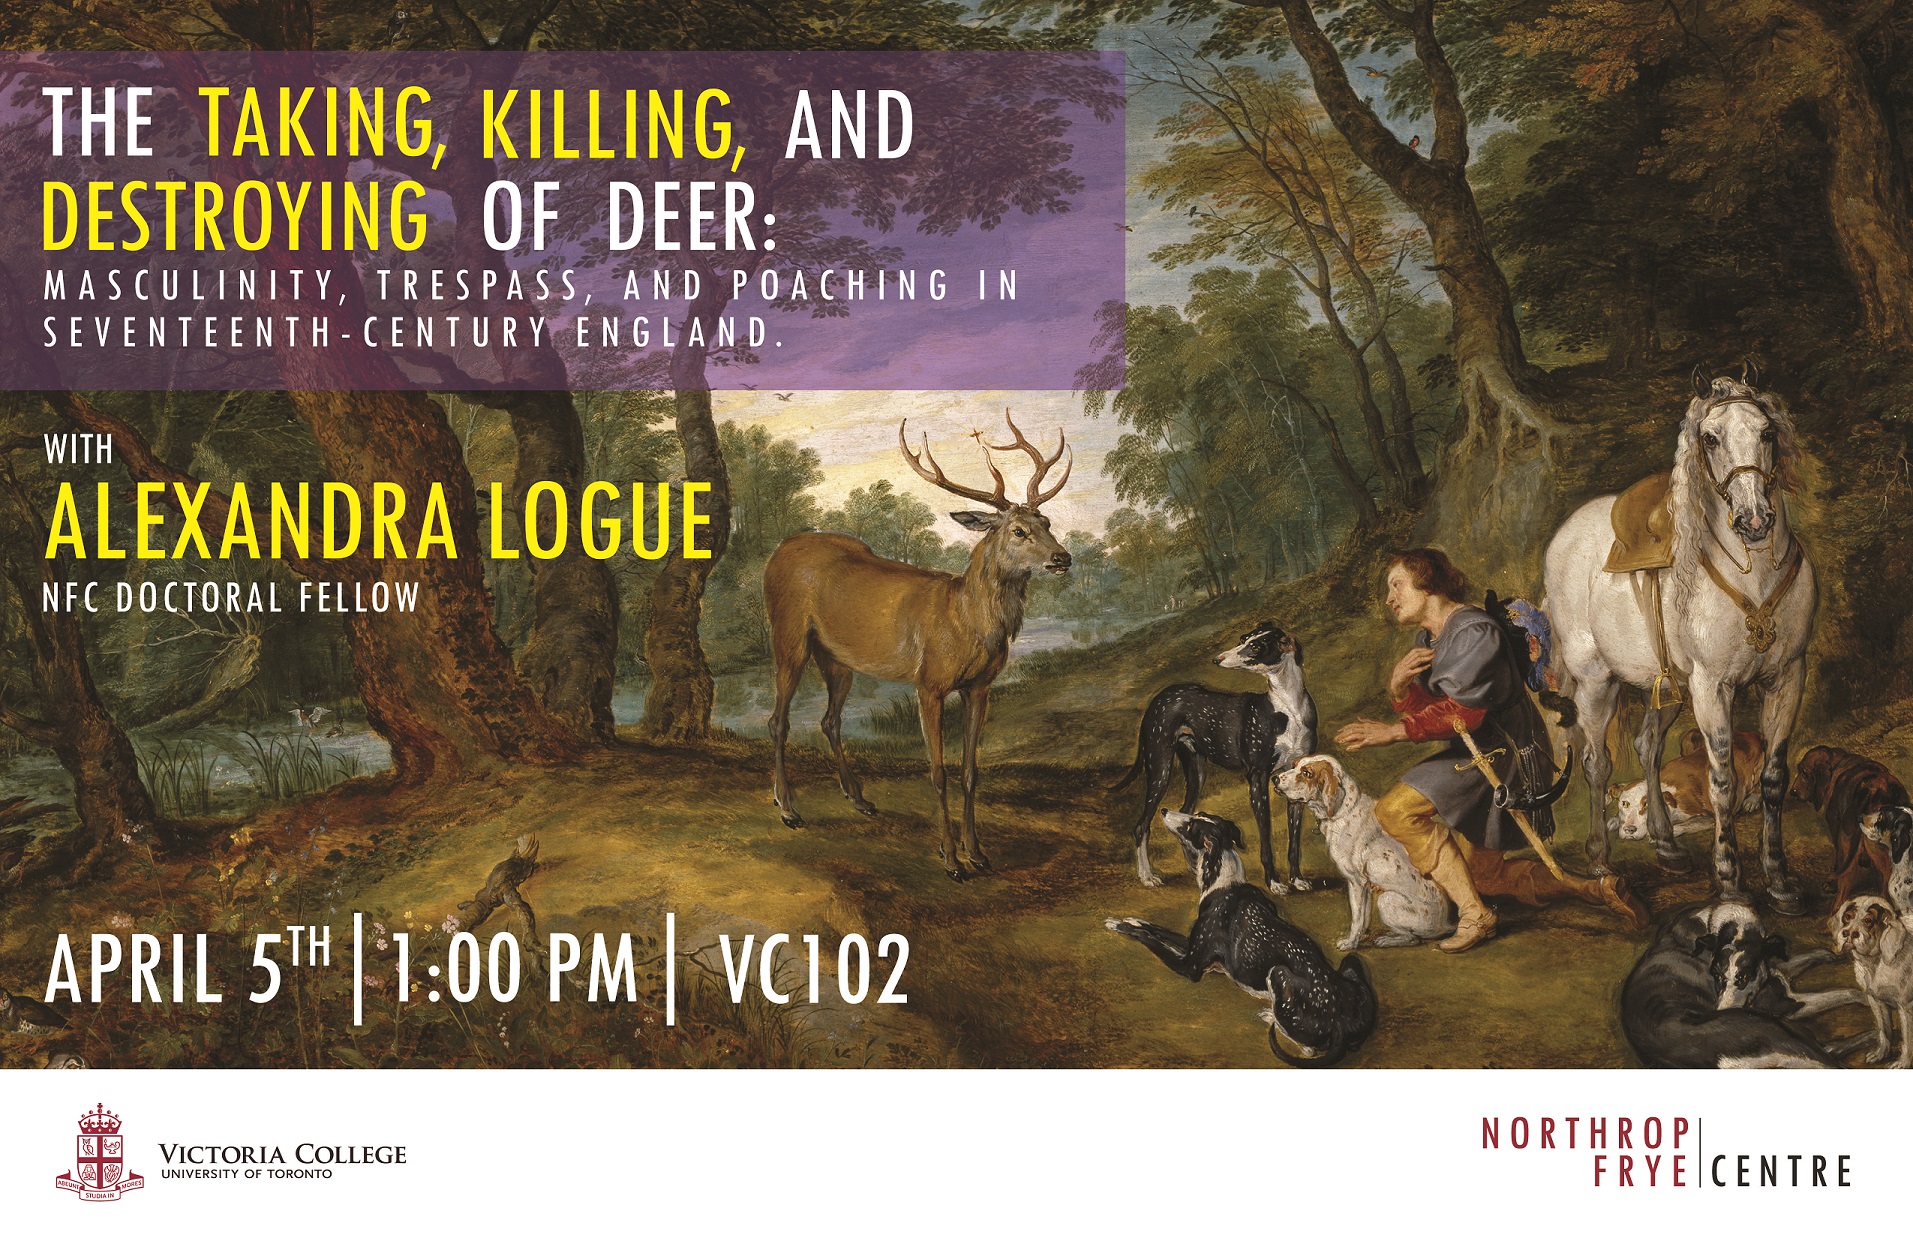 Apr. 5, 2016 | The Taking, Killing, and Destroying of Deer | Alexandra Logue